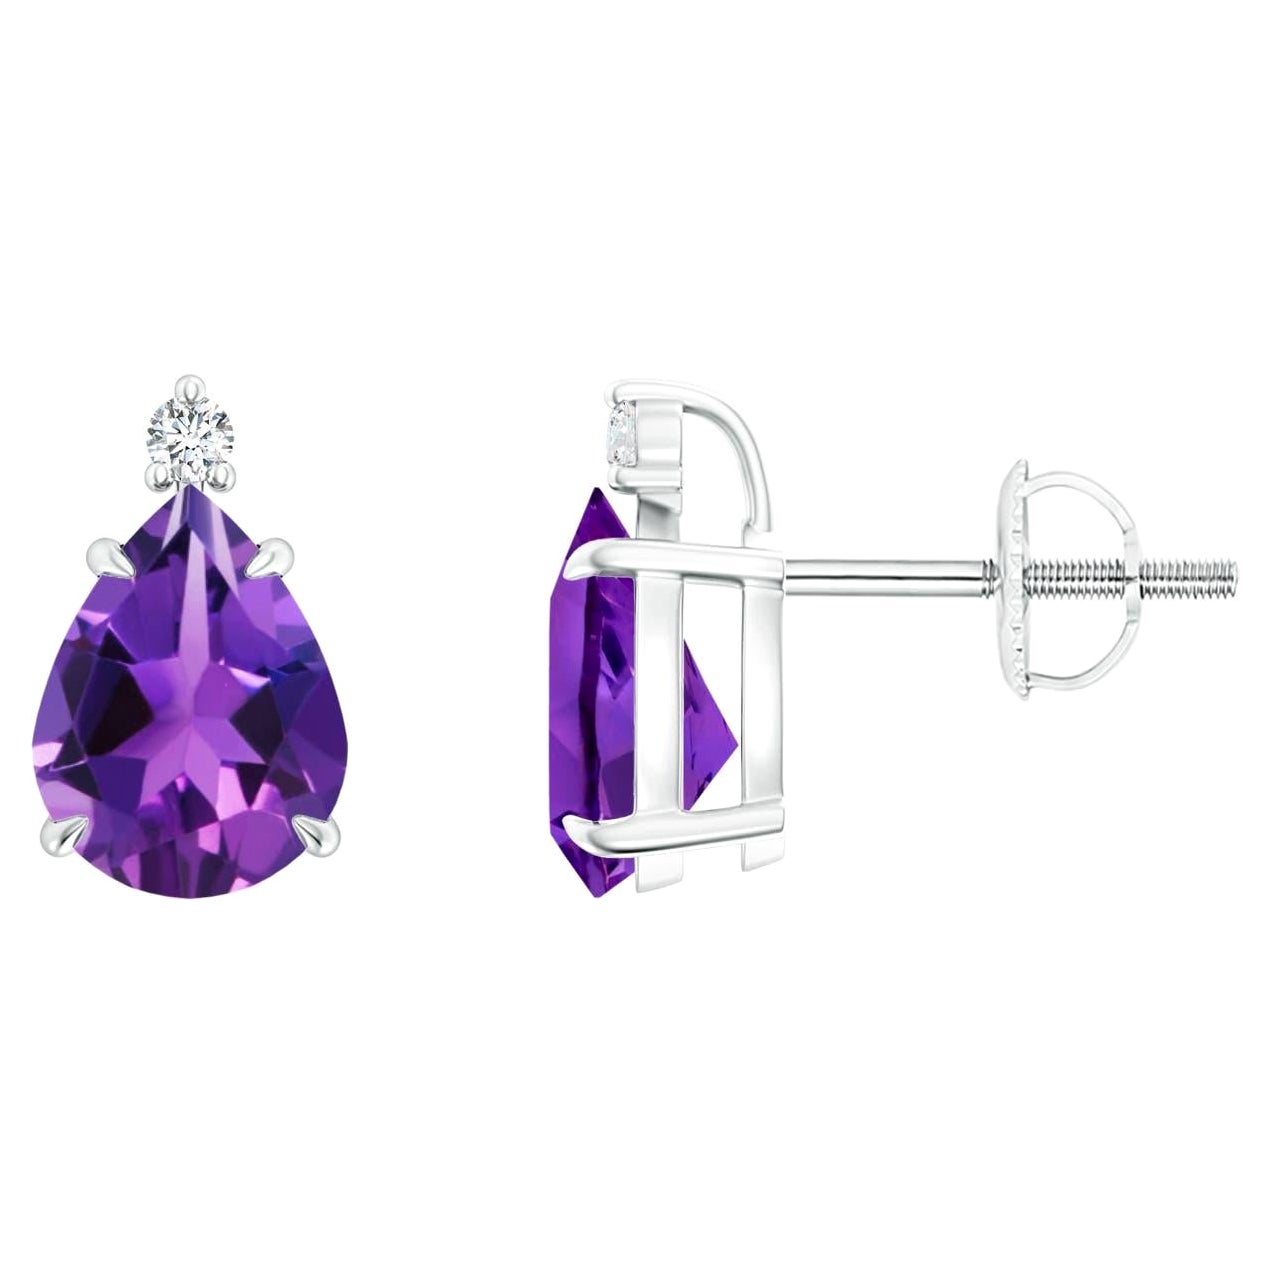 Natural Claw-Set Pear 2ct Amethyst Solitaire Earrings in 14K White Gold